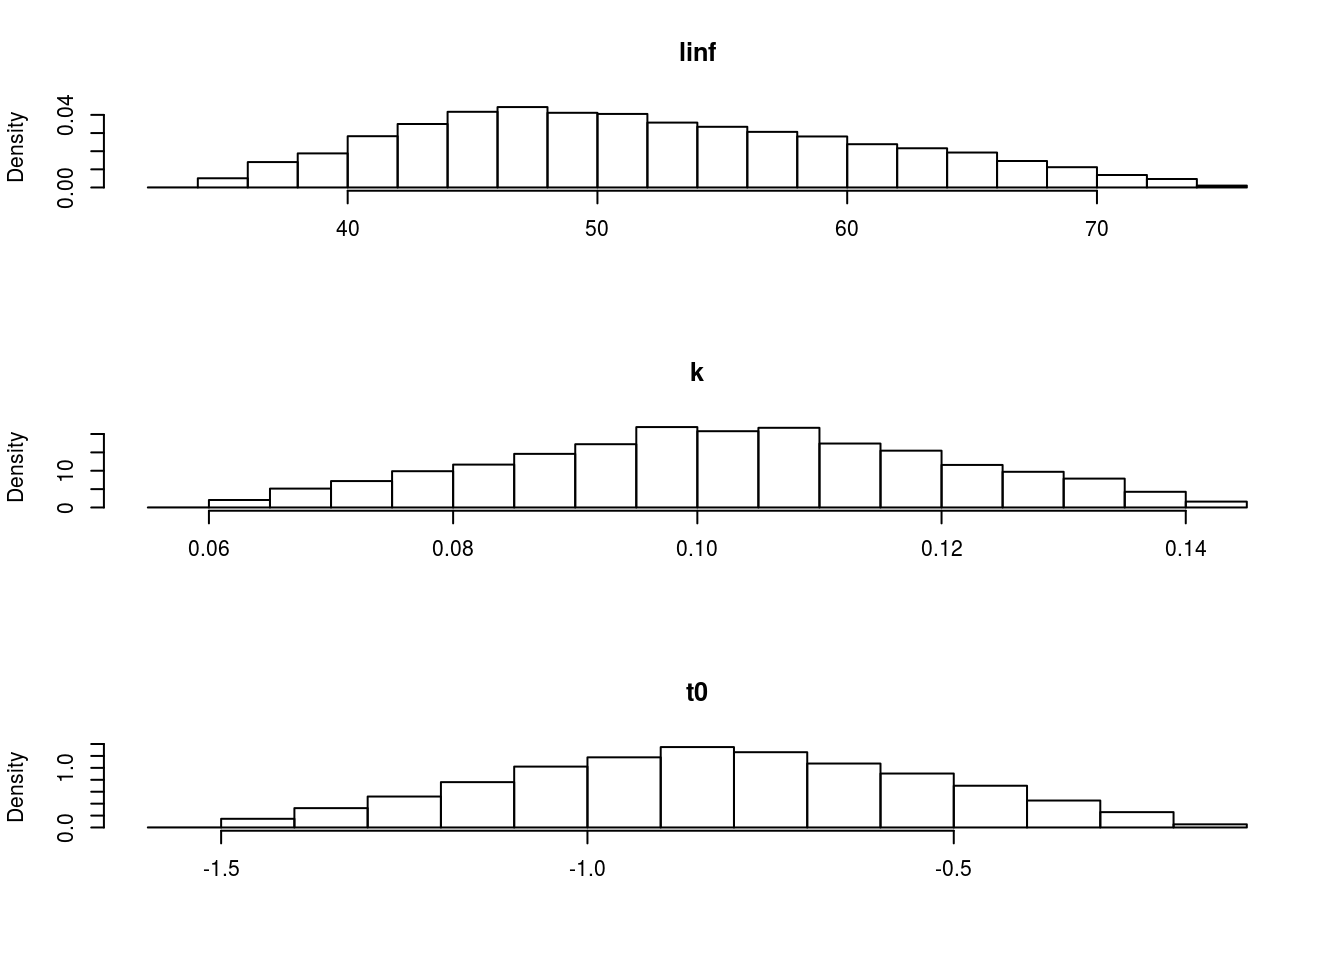 The marginal distributions of each of the parameters based on a multivariate triangle distribution.